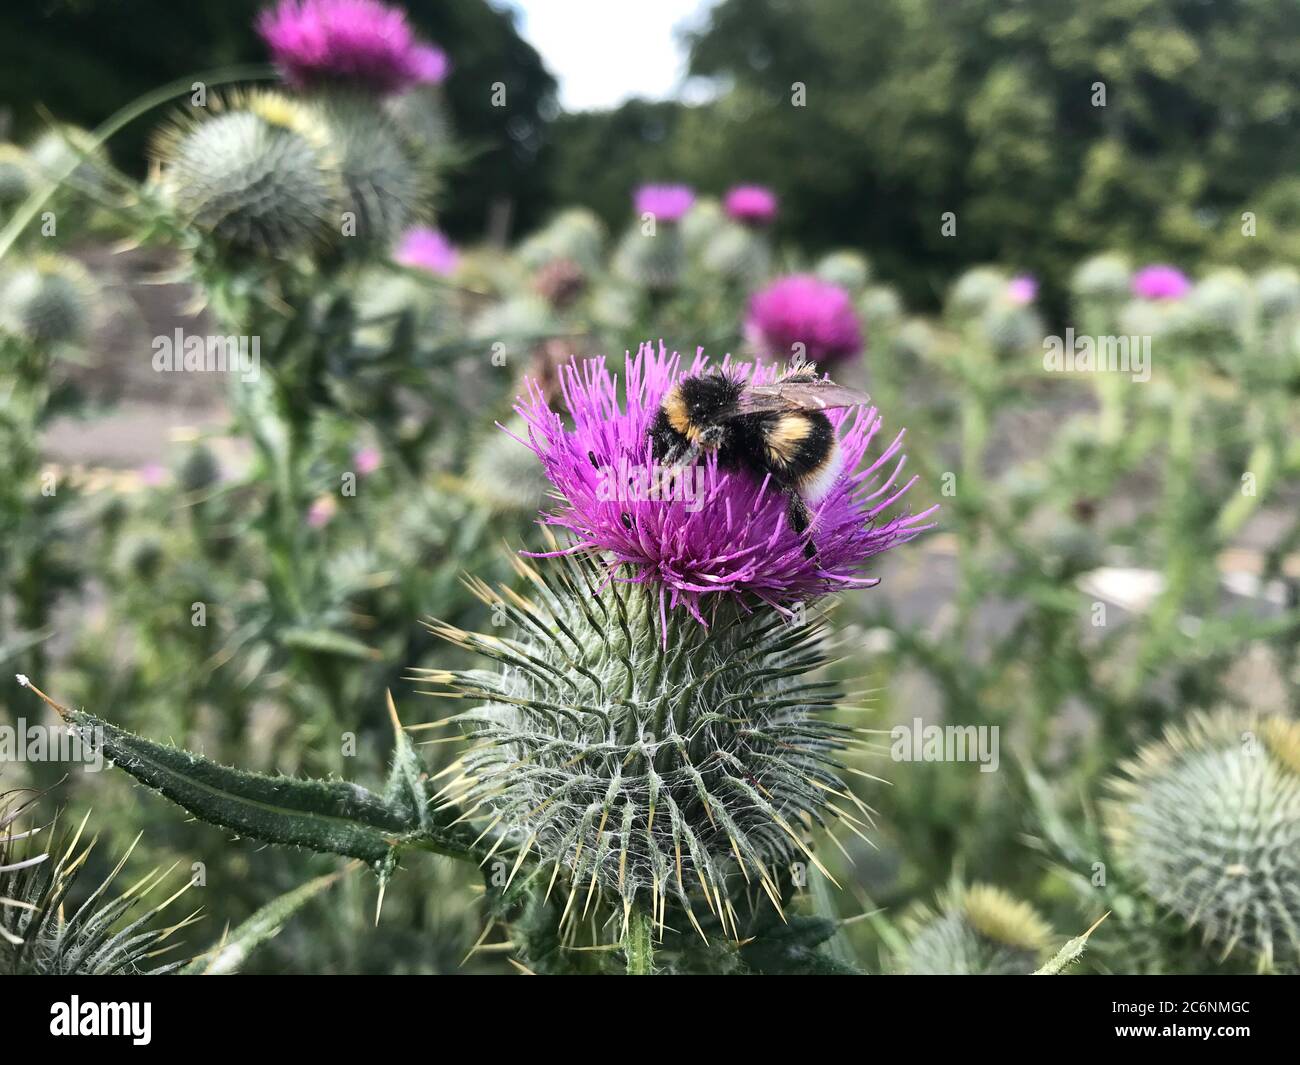 Bumblebee collecting nectar from a thistle (Onopordum acanthium), West Lothian, Scotland. Stock Photo